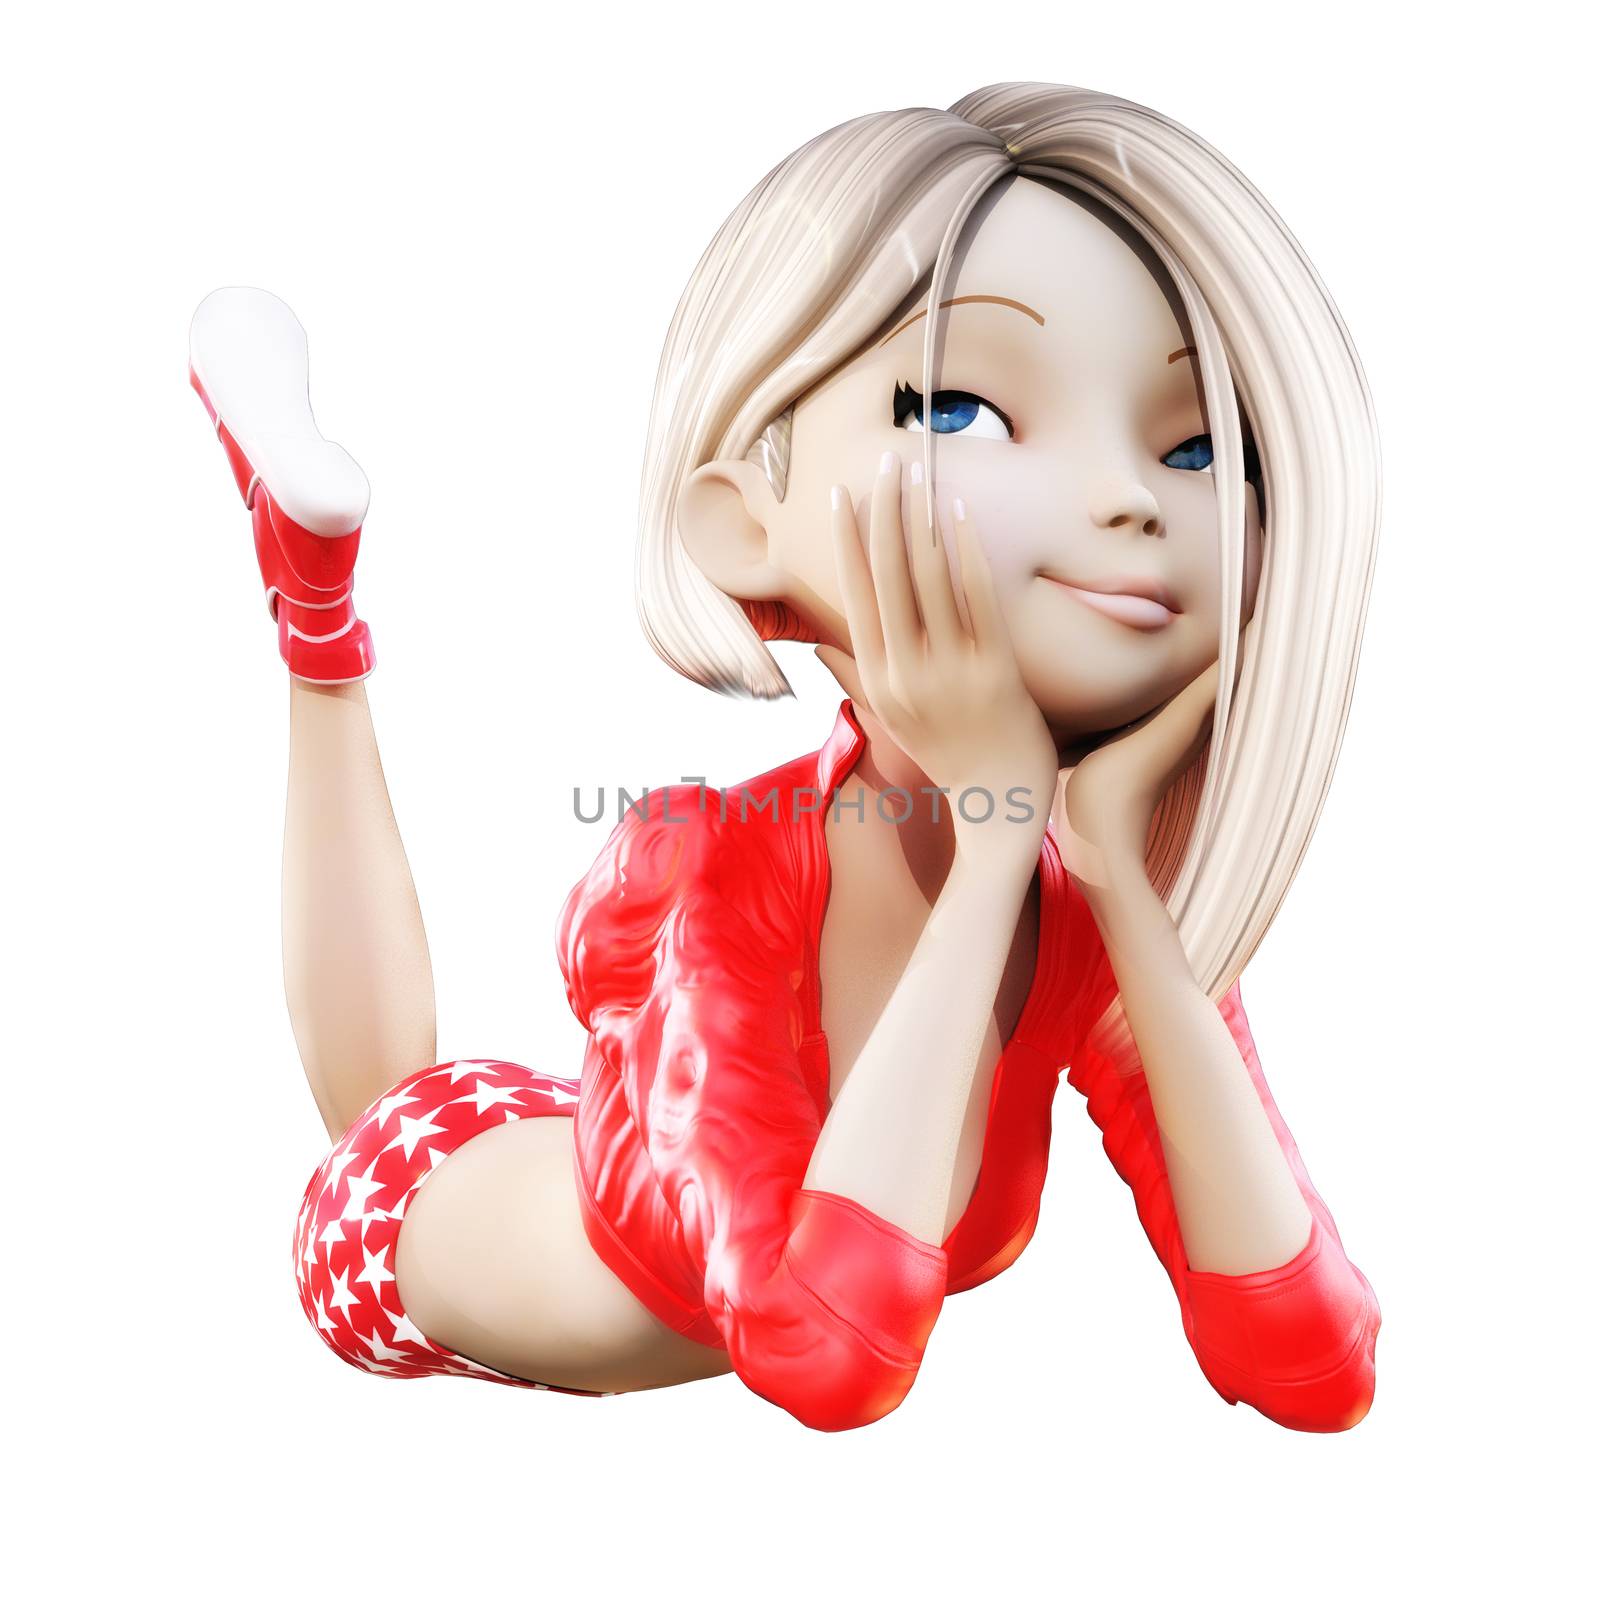 Digital 3D Illustration of a Toon Girl, Cutout on white Background